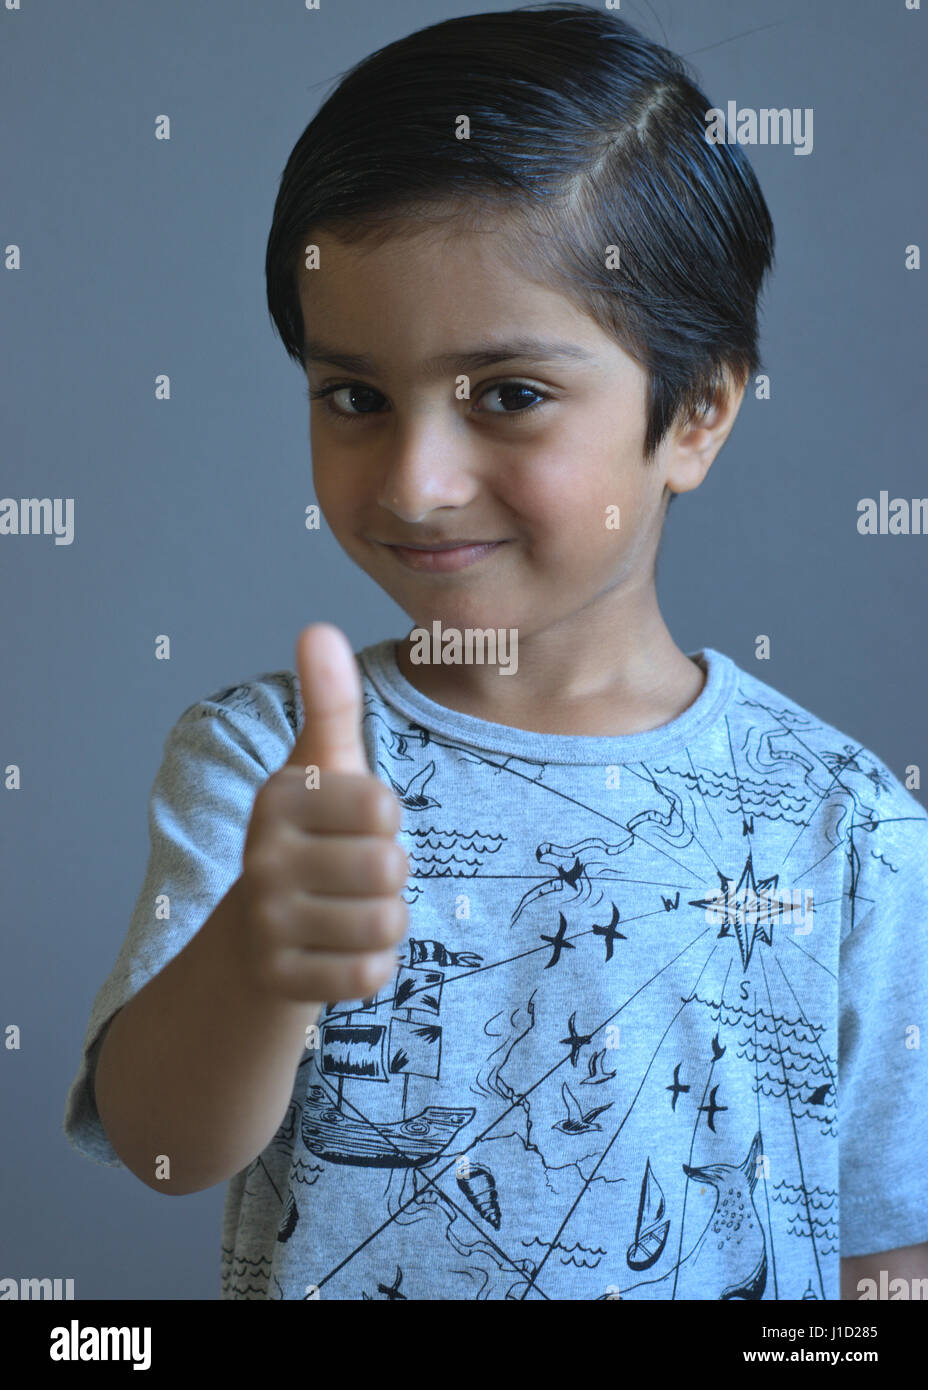 Happy kid doing thumbs up. Smiling child showing positive attitude Stock Photo